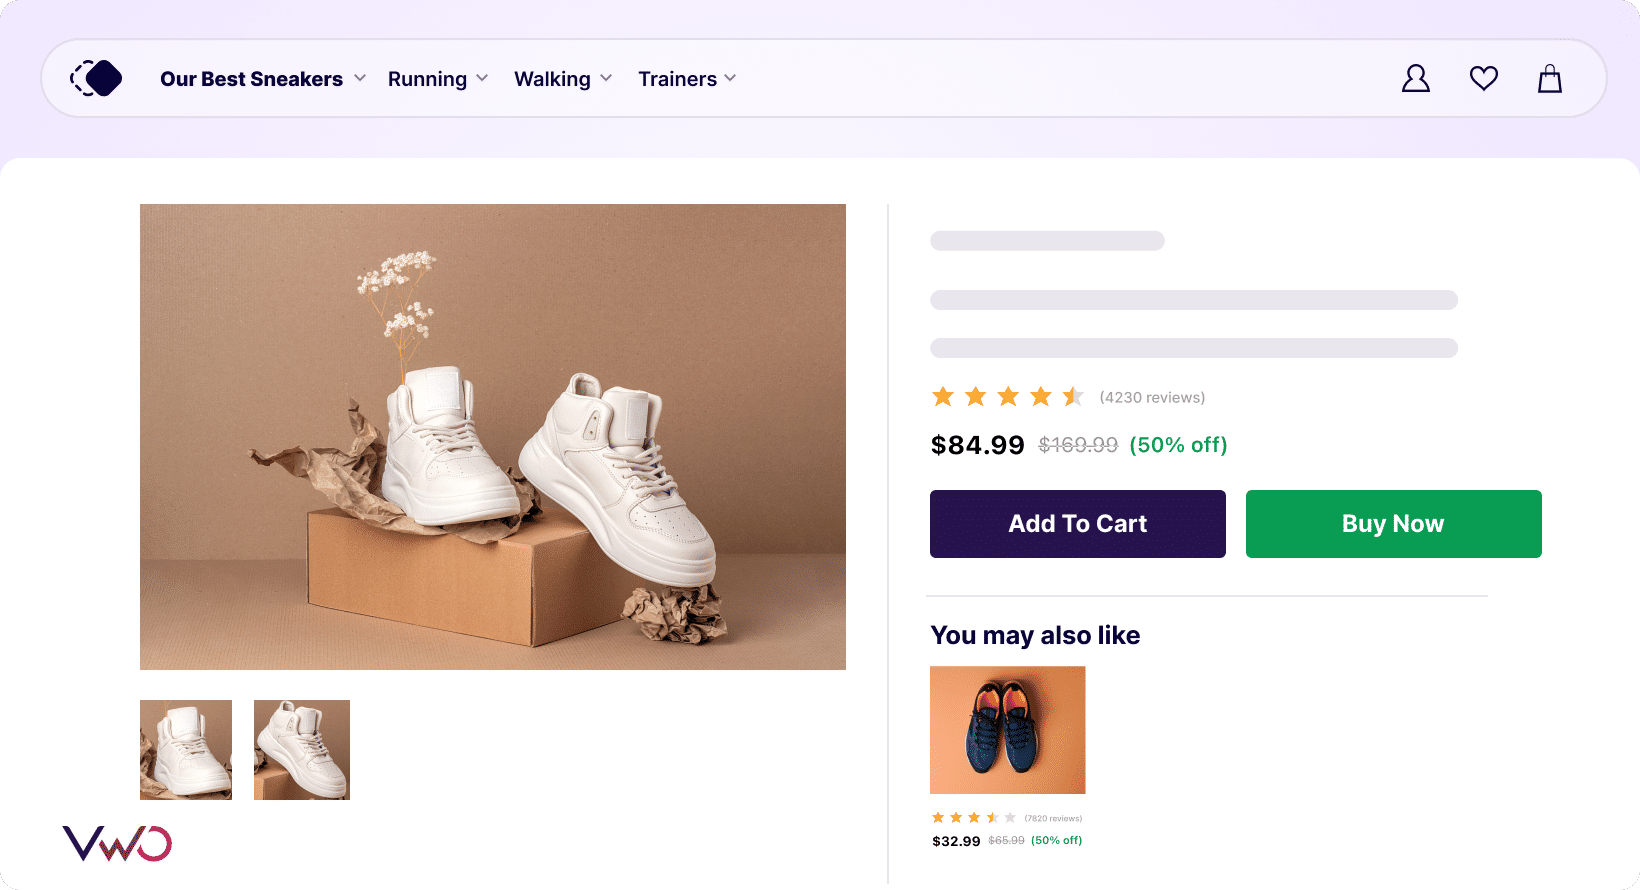 Product page of a sneaker